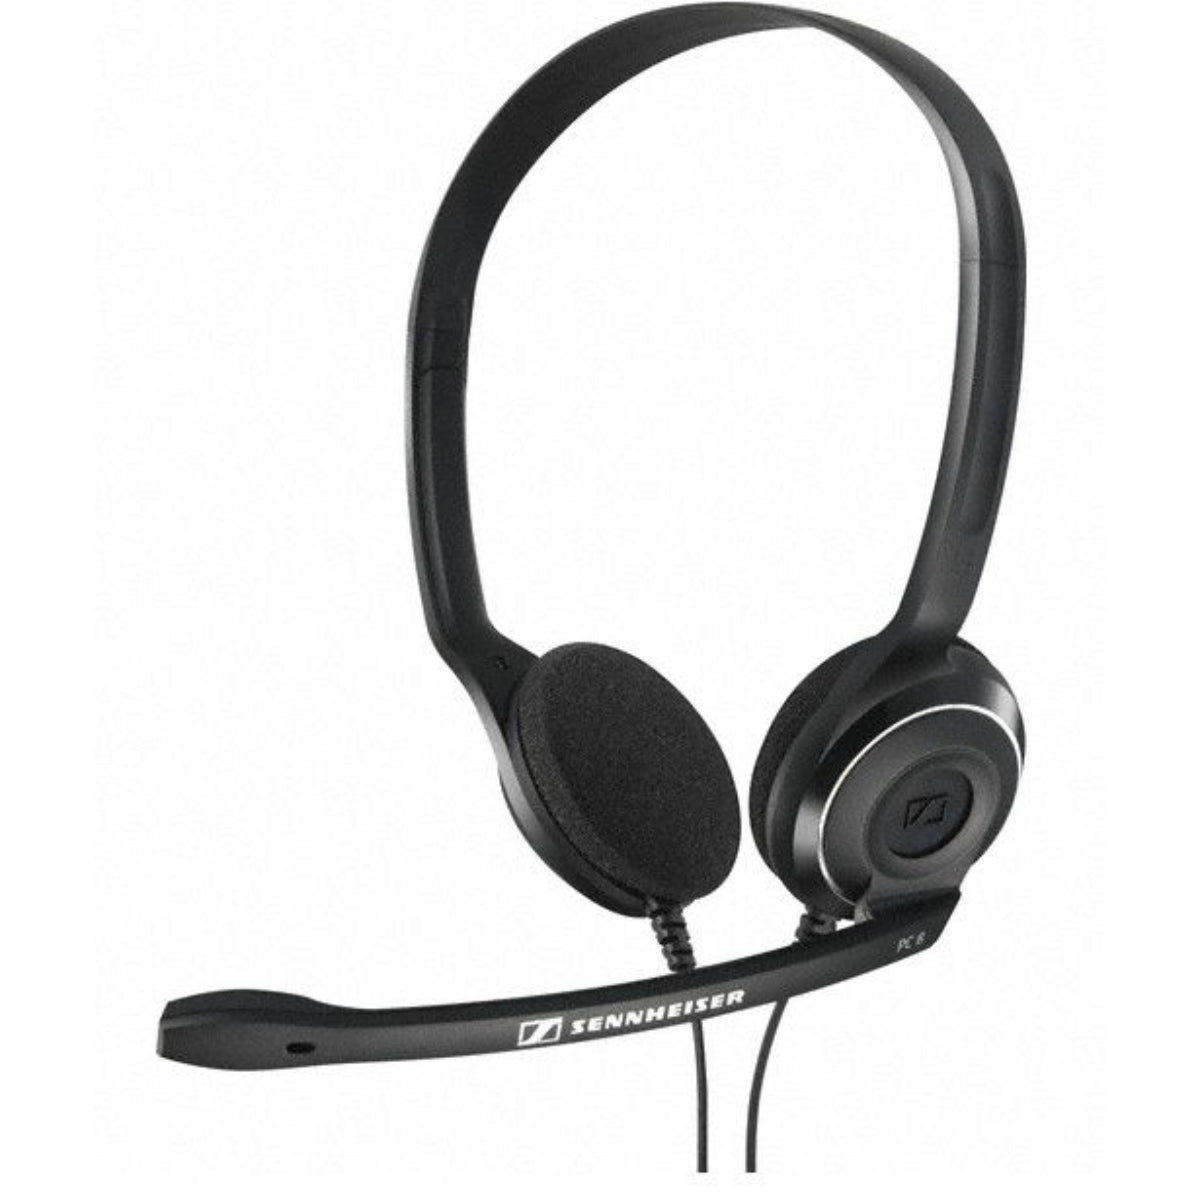 Sennheiser PC 8 USB Over Head Binaural Voip Headset, 2m Cable, Noise Cancelling Microphone